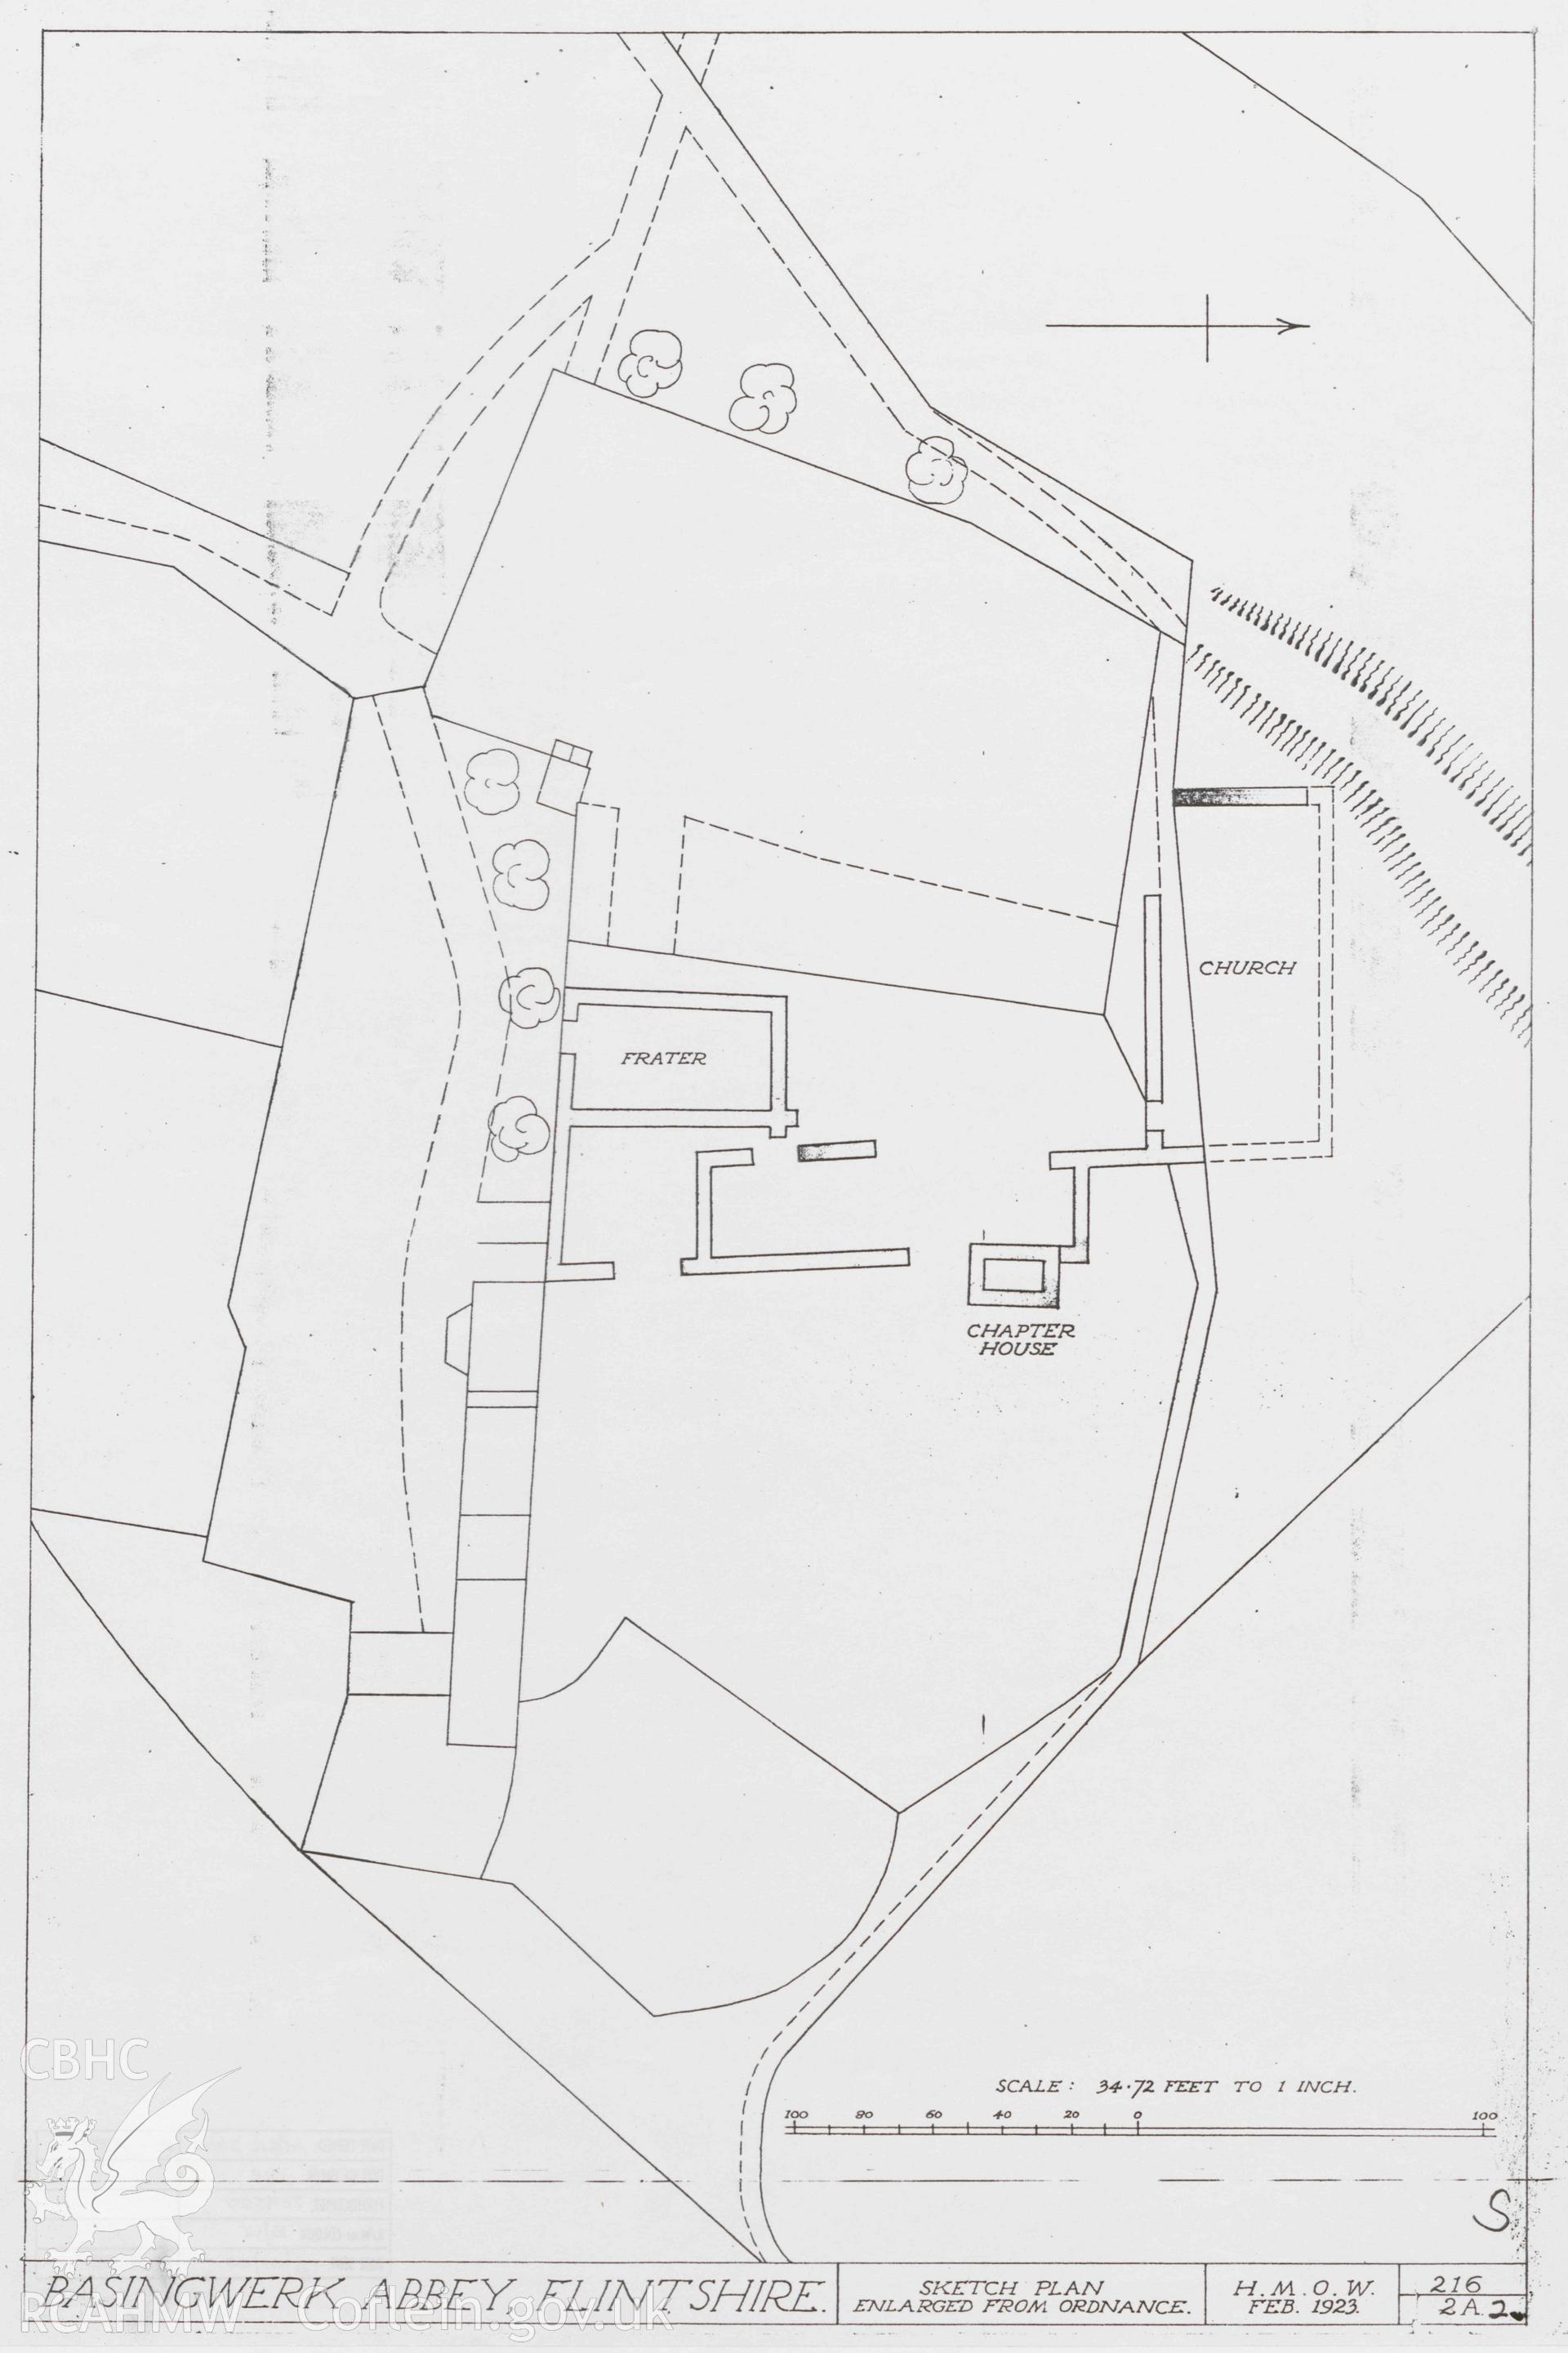 Cadw guardianship monument drawing of Basingwerk Abbey. Sketch-plan, standing walls. Cadw Ref. No. 216/2a2. Scale 1:416.64.